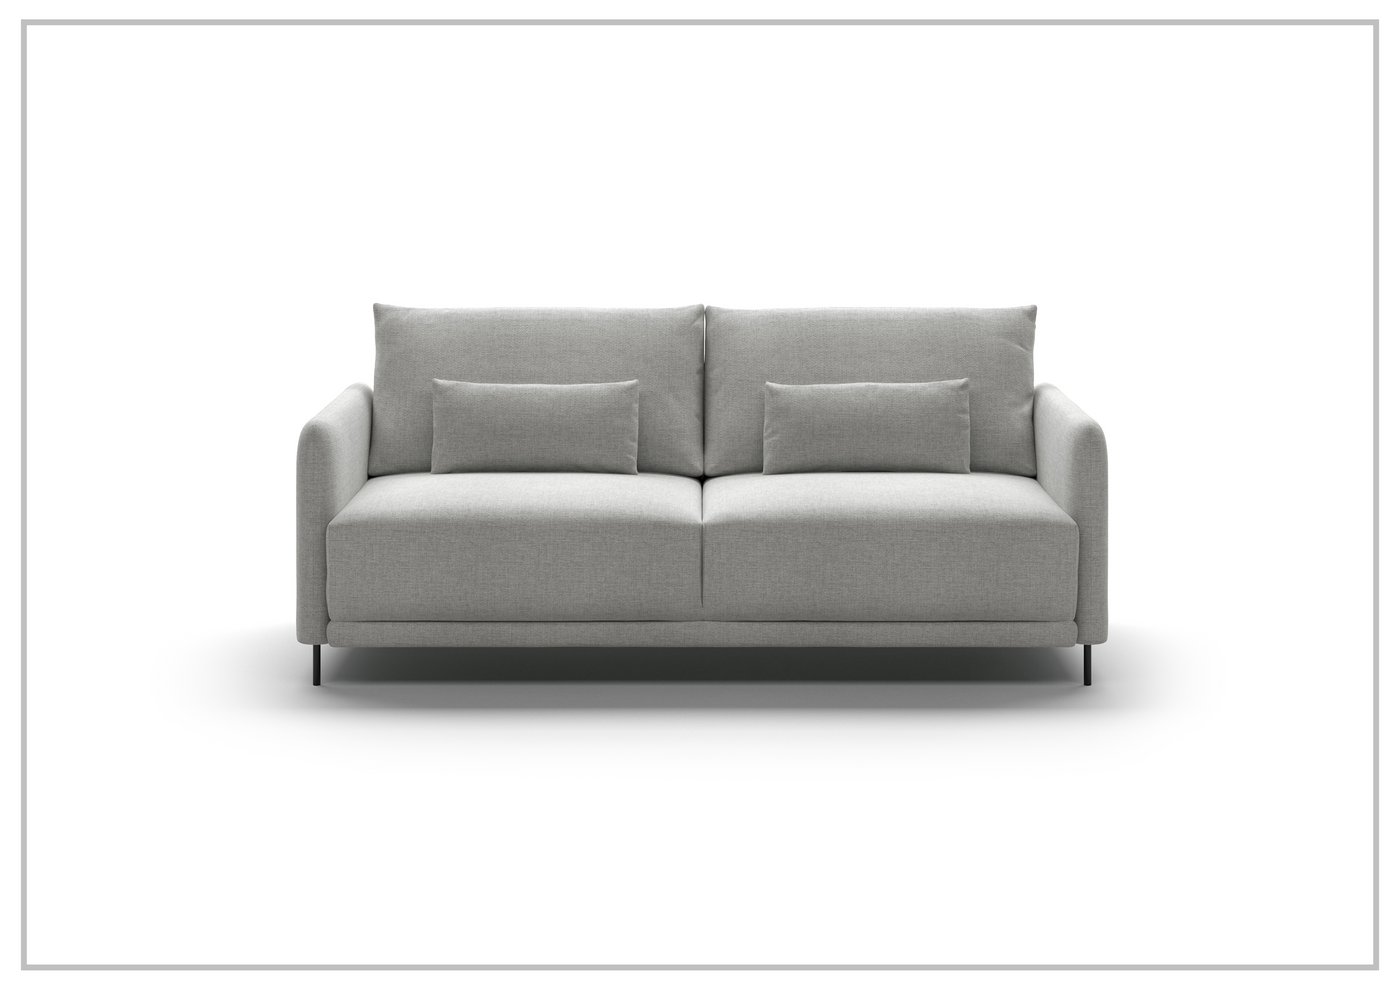 Haven Gray Fabric Sleeper with Hybrid Deluxe Function